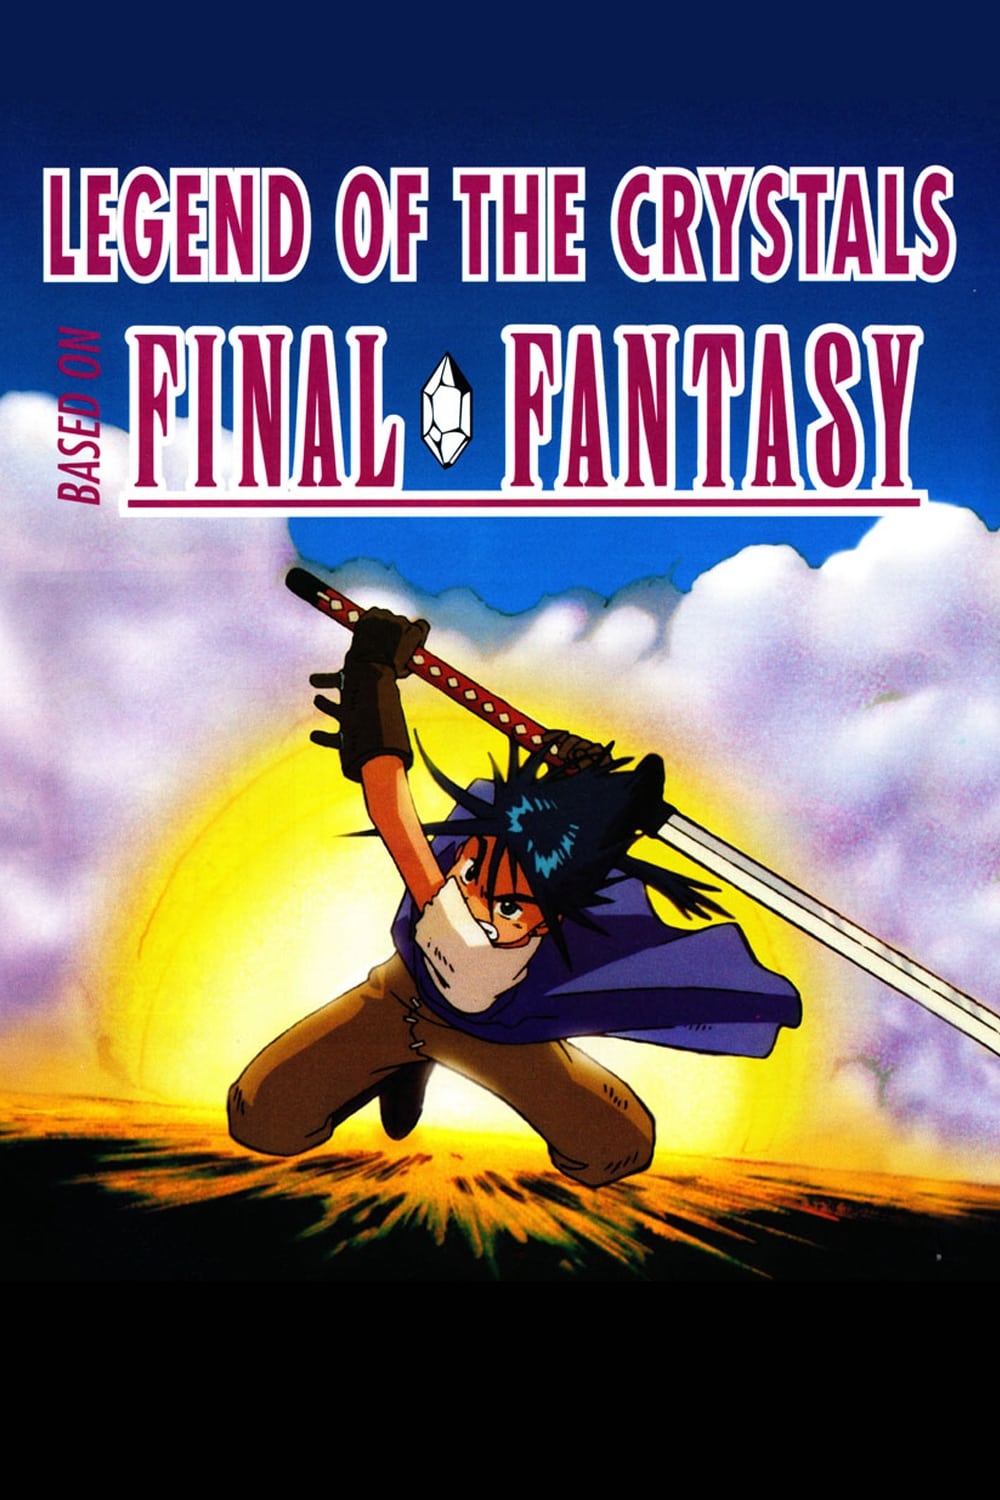 Final Fantasy: Legend of the Crystals (1994)